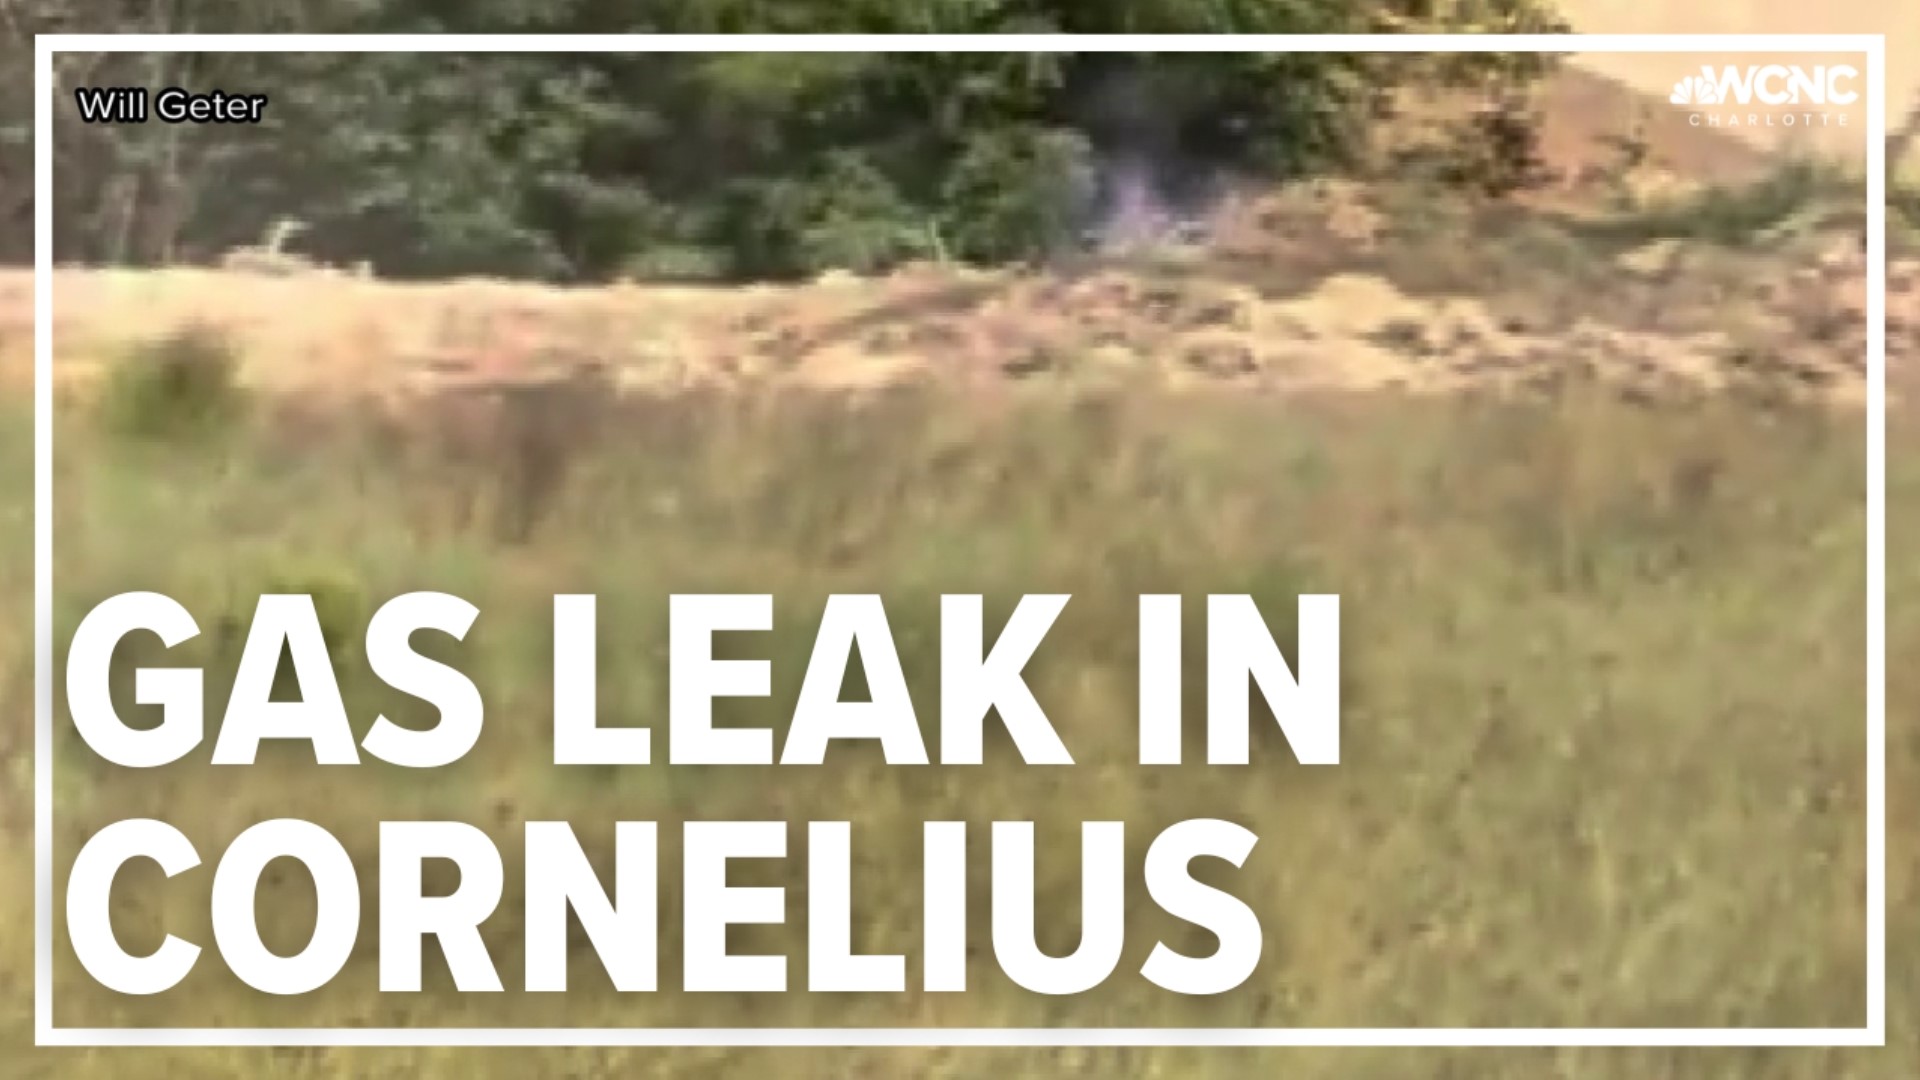 Emergency crews in Cornelius responded to a large gas leak near the Westmoreland Athletic Complex Tuesday. The leak has been controlled, Cornelius police confirmed.